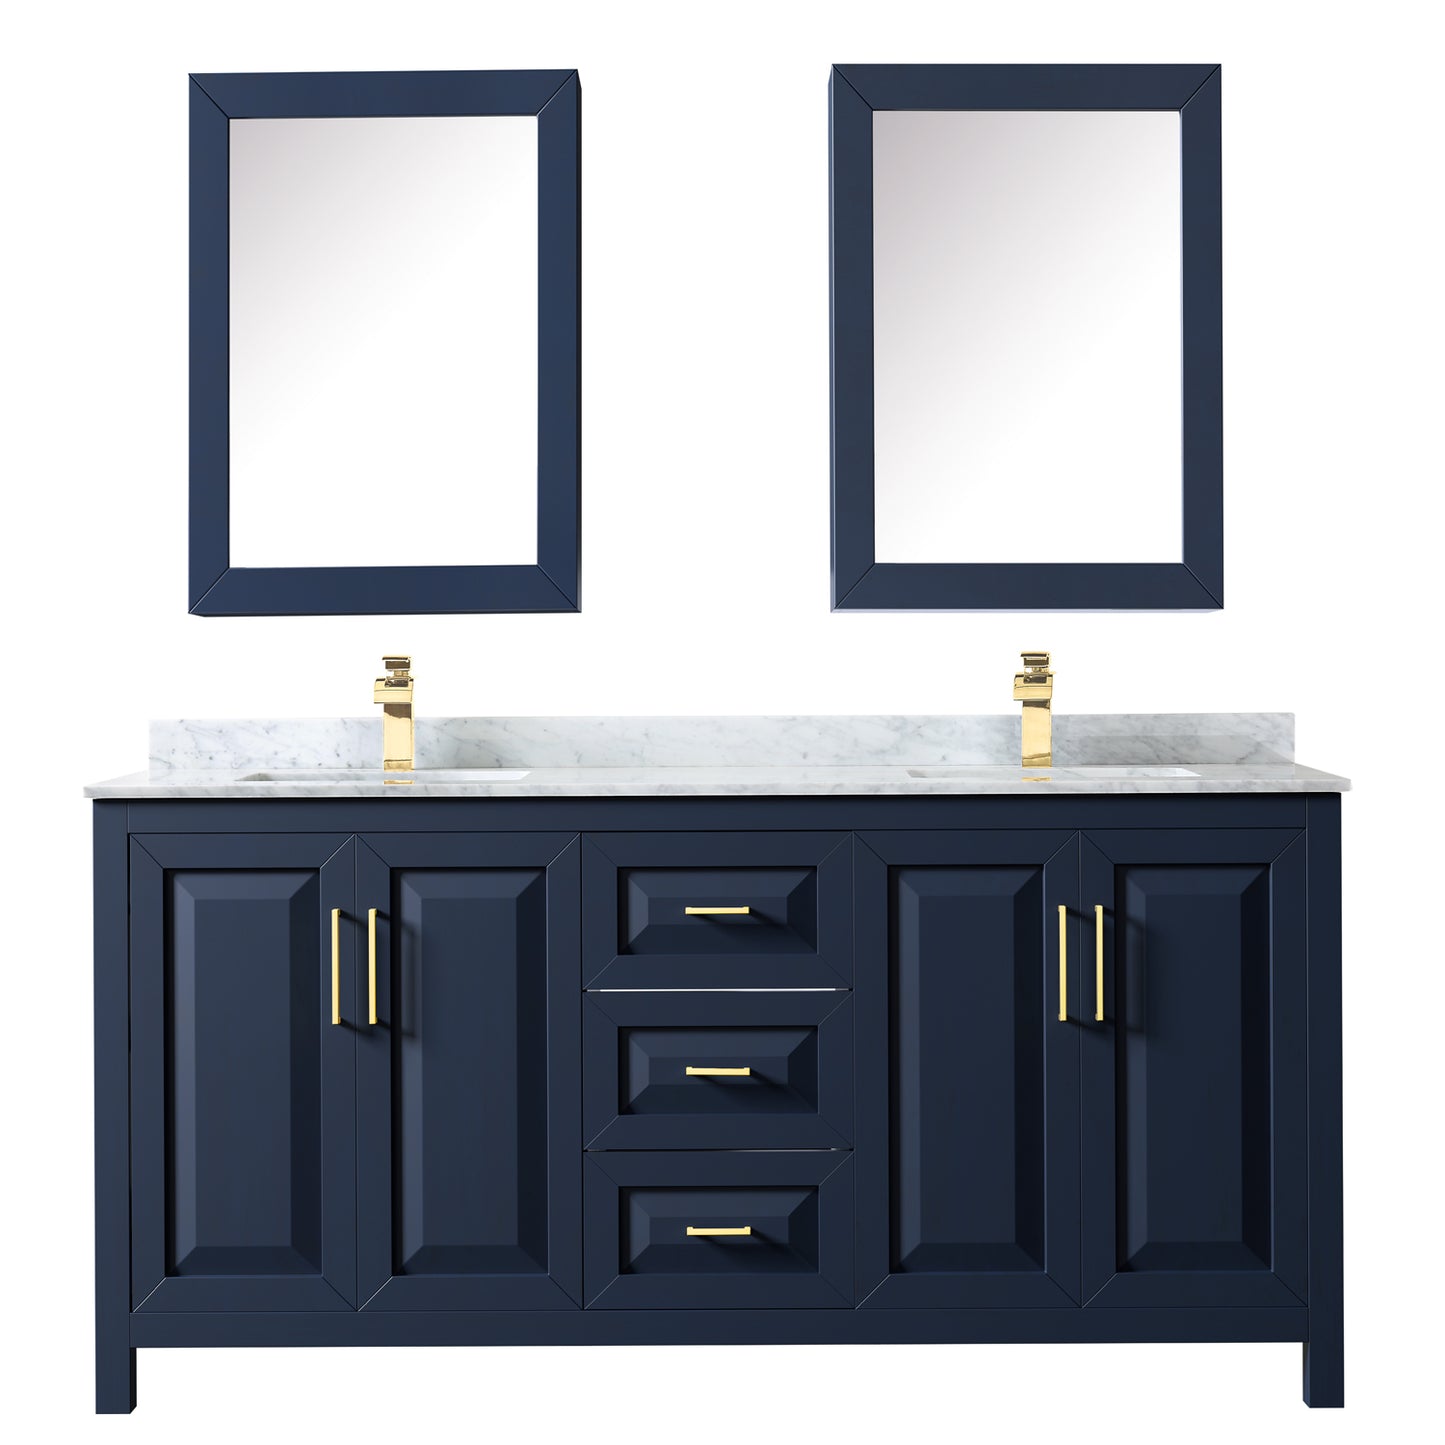 Wyndham Collection Daria Double Bathroom Vanity with White Carrara Marble Countertop, Undermount Square Sinks, and Optional Mirror/Medicine Cabinet